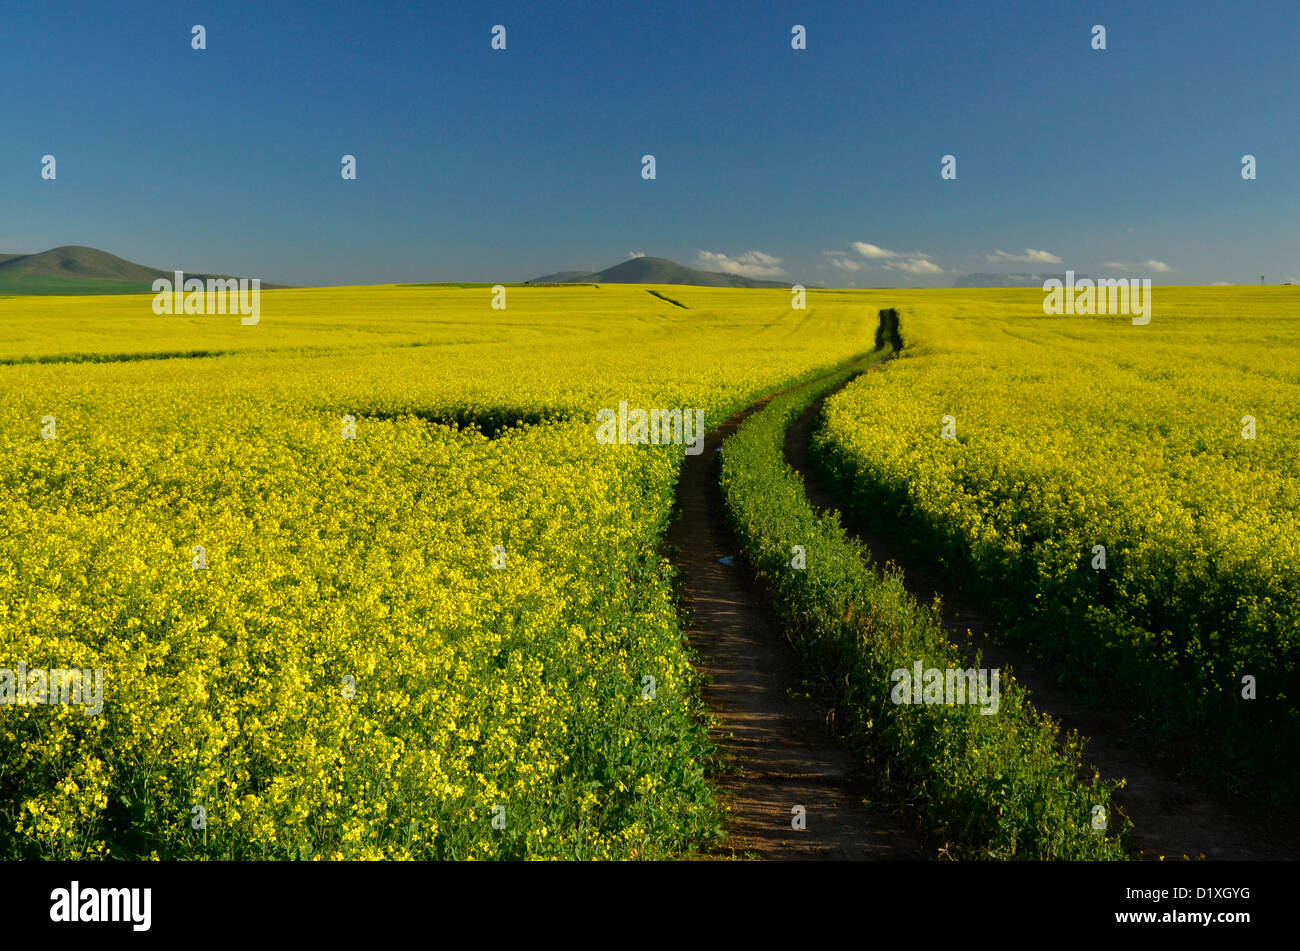 Yellow canola field with path leading into distance where Table Mountain lies on horizon. Cape Town, South Africa Stock Photo